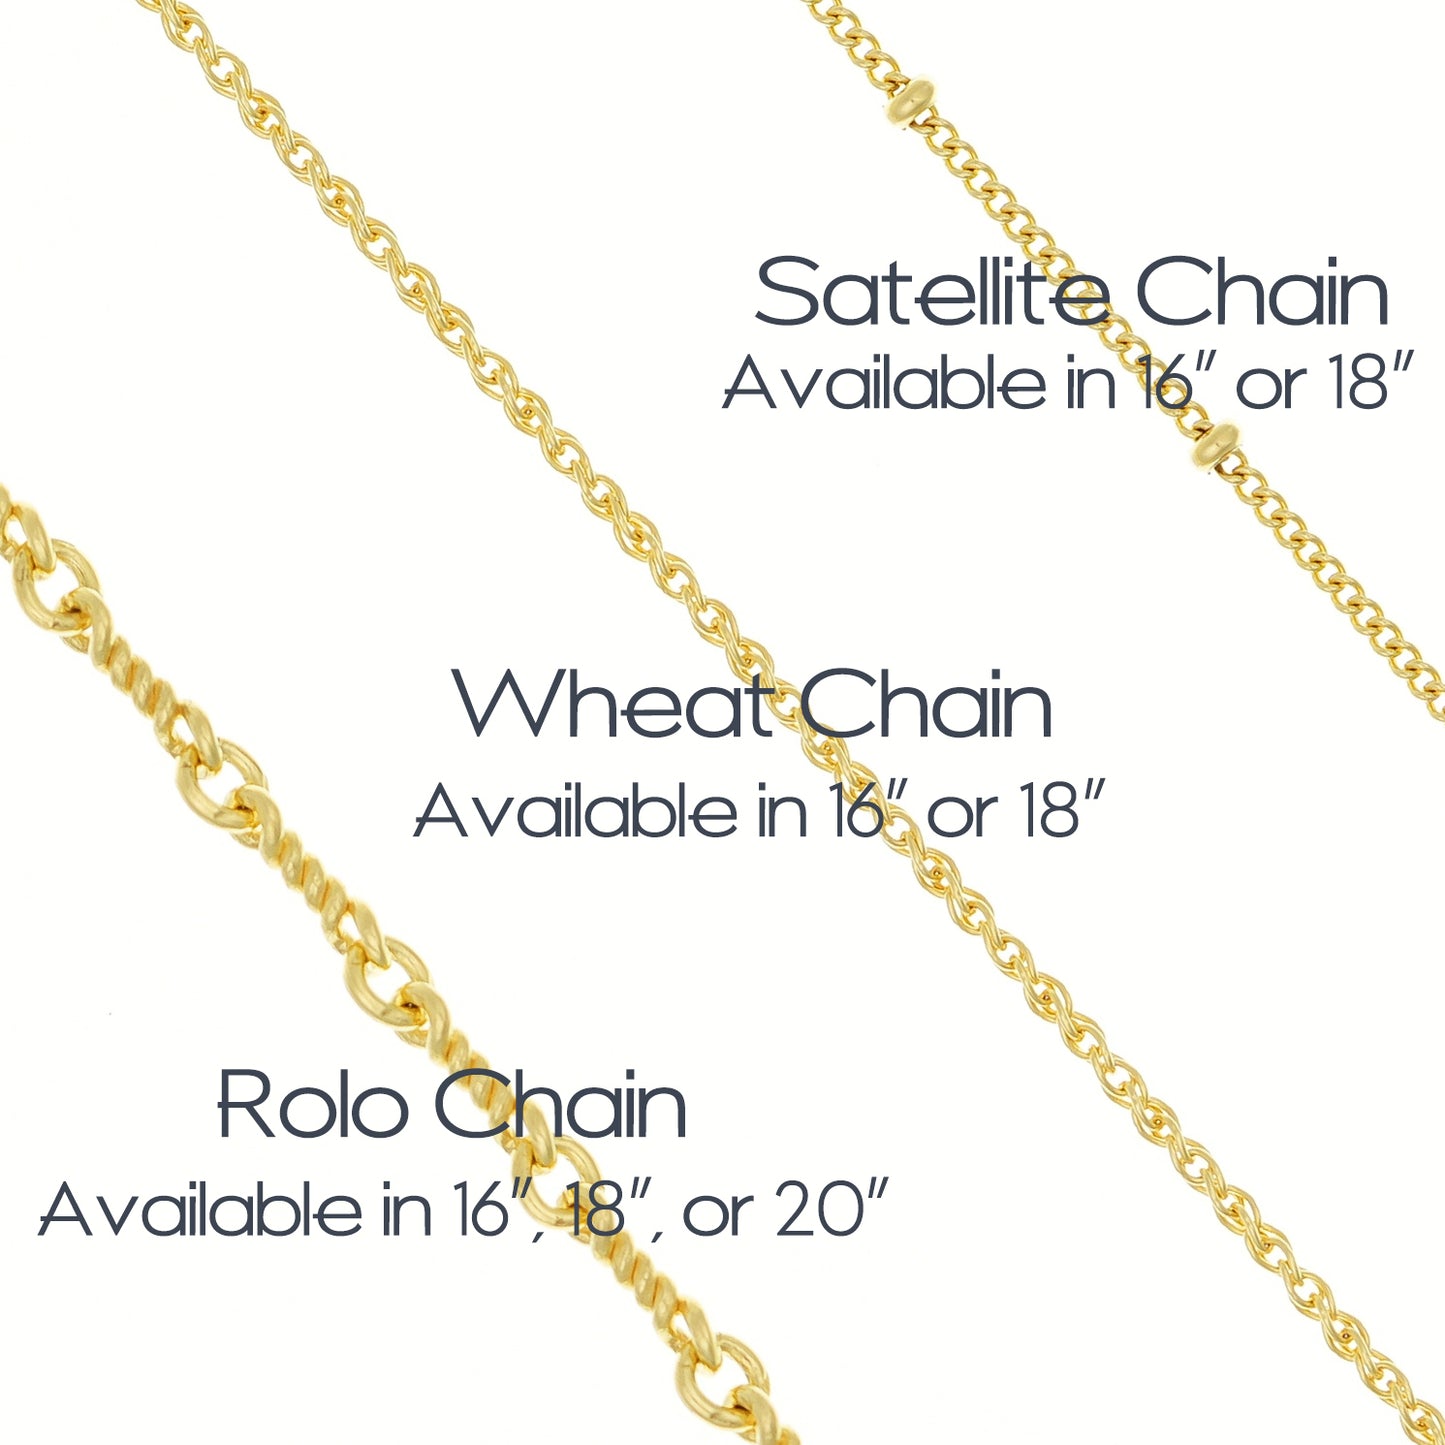 Satellite Chain (Chain with beads spaced approx 8mm apart on chain) is available in 16 or 18 inches.  Wheat chain is available in 16 or 18 inches.  Gold Rolo chain is a twisted cable chain and available in 16, 18, or 20 inches.  Chains are 14k gold filled.